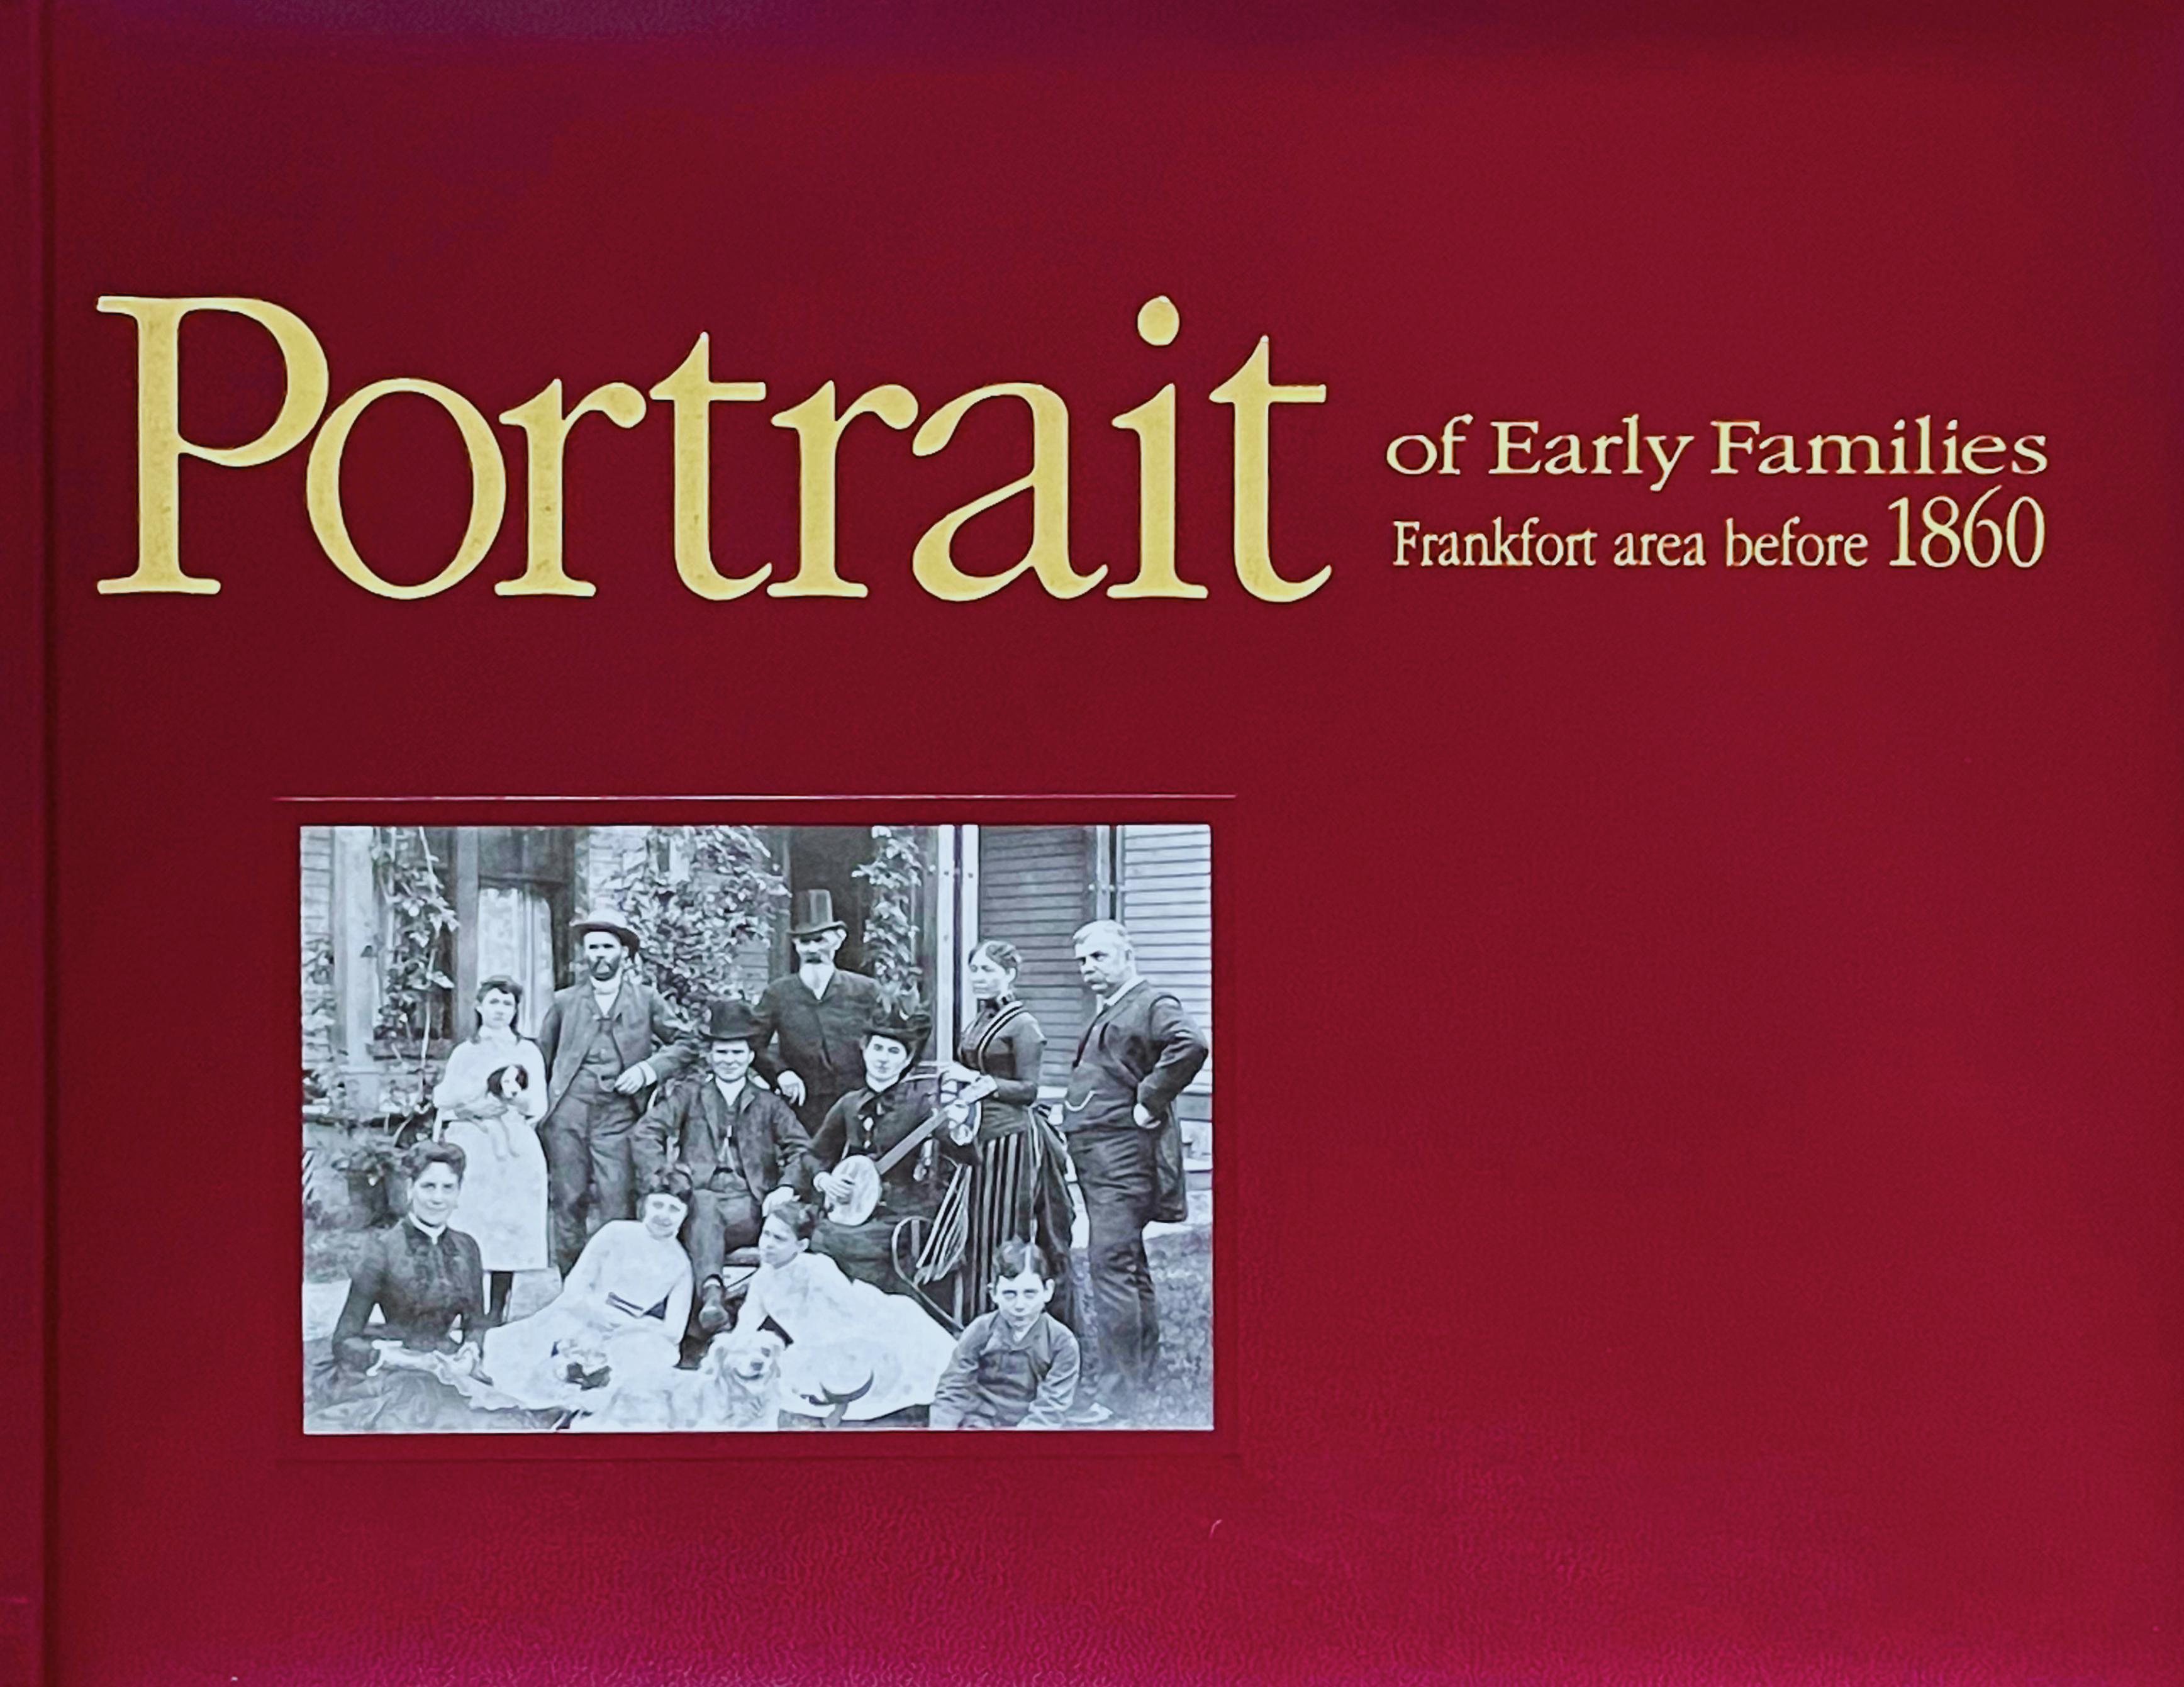 Book cover - Portrait of Early Families by Nash Cox & Sallie Clay Lanham